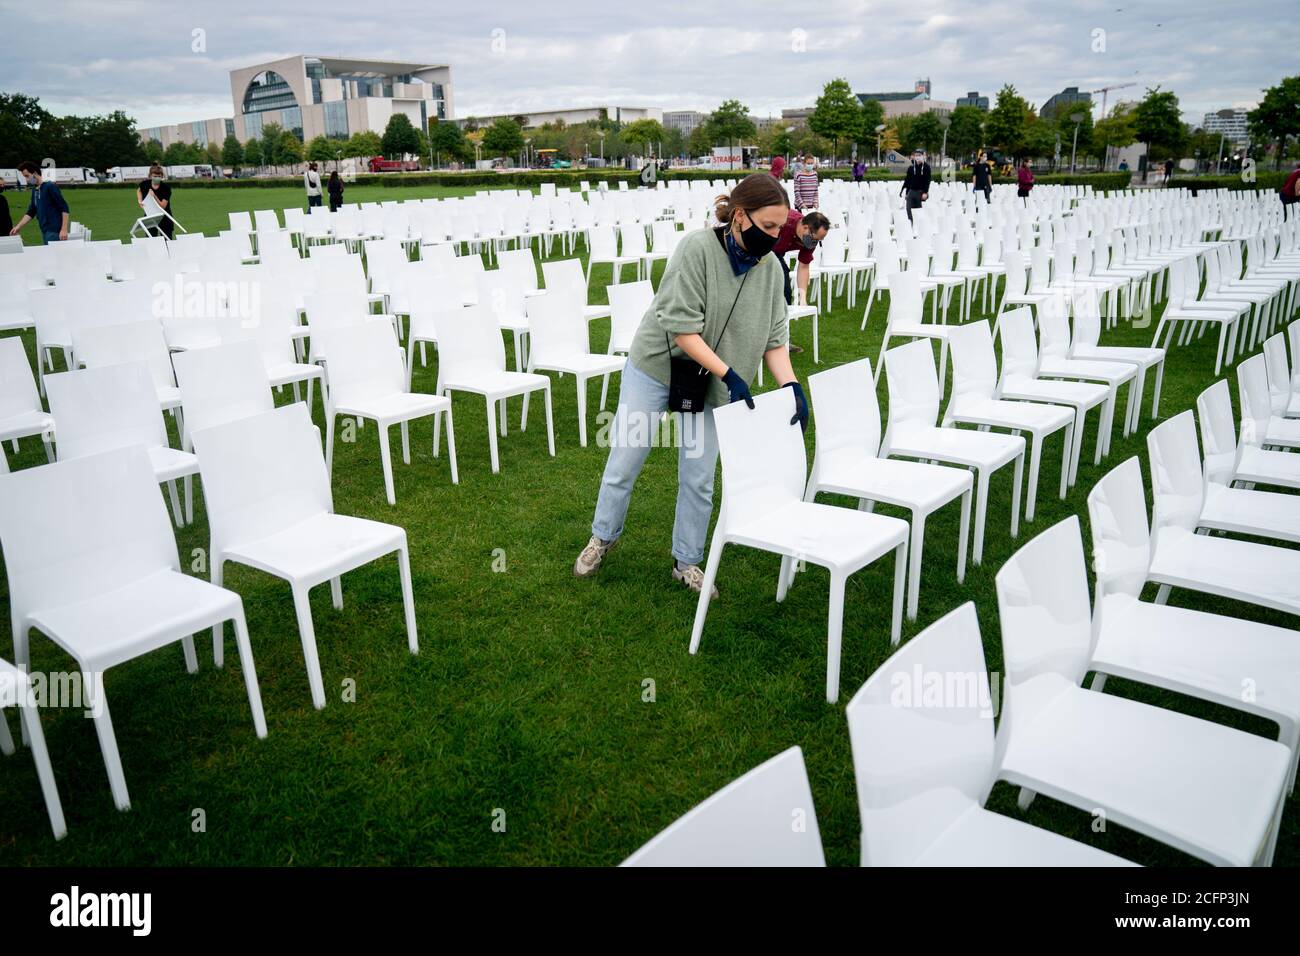 Berlin, Germany. 07th Sep, 2020. Helpers set up chairs on the Platz der Republik in front of the Reichstag building. As part of the nationwide anti-racist action days of 'We'll Come United', some 13,000 chairs will be placed here in front of the Bundestag later this afternoon. The chairs symbolise the people who currently live in Moria, as well as the square and the receptiveness of the cities, states and civil society. Organised jointly by Seebrücke, Sea-Watch, #LeaveNoOneBehind and Campact. Credit: Kay Nietfeld/dpa/Alamy Live News Stock Photo